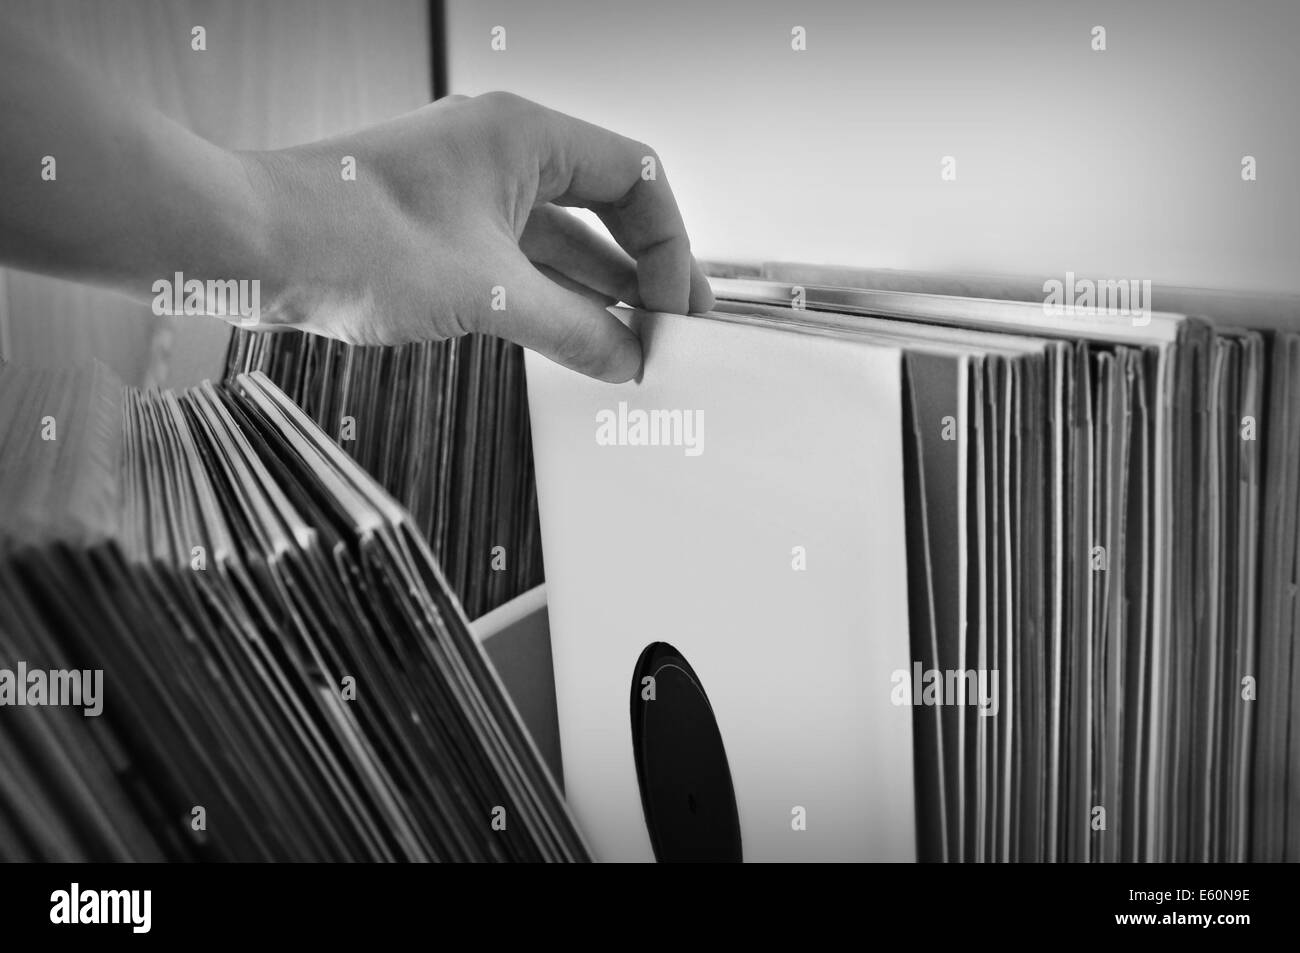 Crate digging through vinyl records music collection. Black and white. Stock Photo